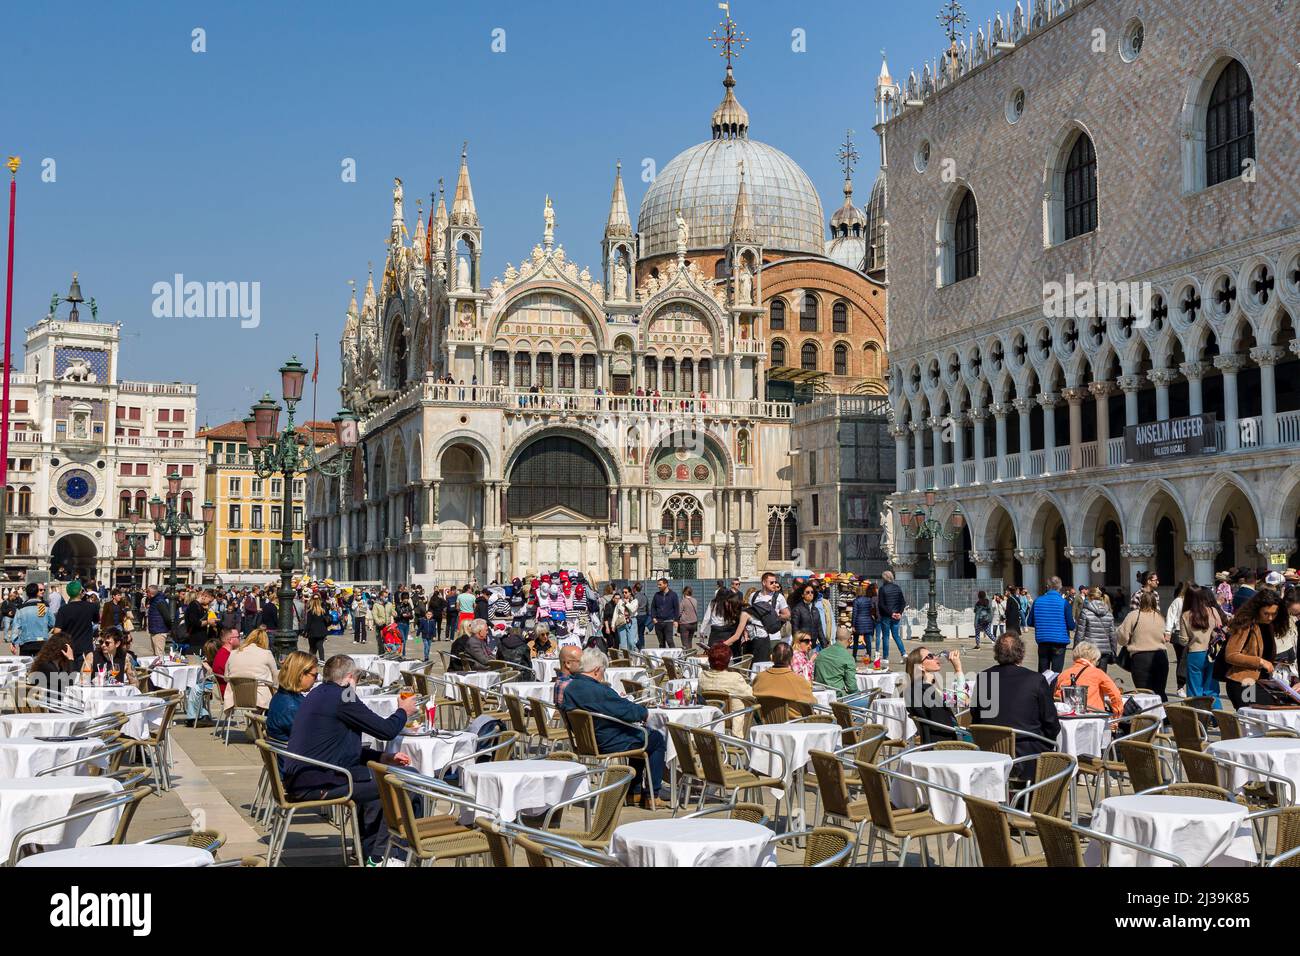 VENICE, ITALY - MARCH 27 2022: Crowds of tourists congregate around St Mark's Square and surrounding area in the famous Italian city of Venice Stock Photo